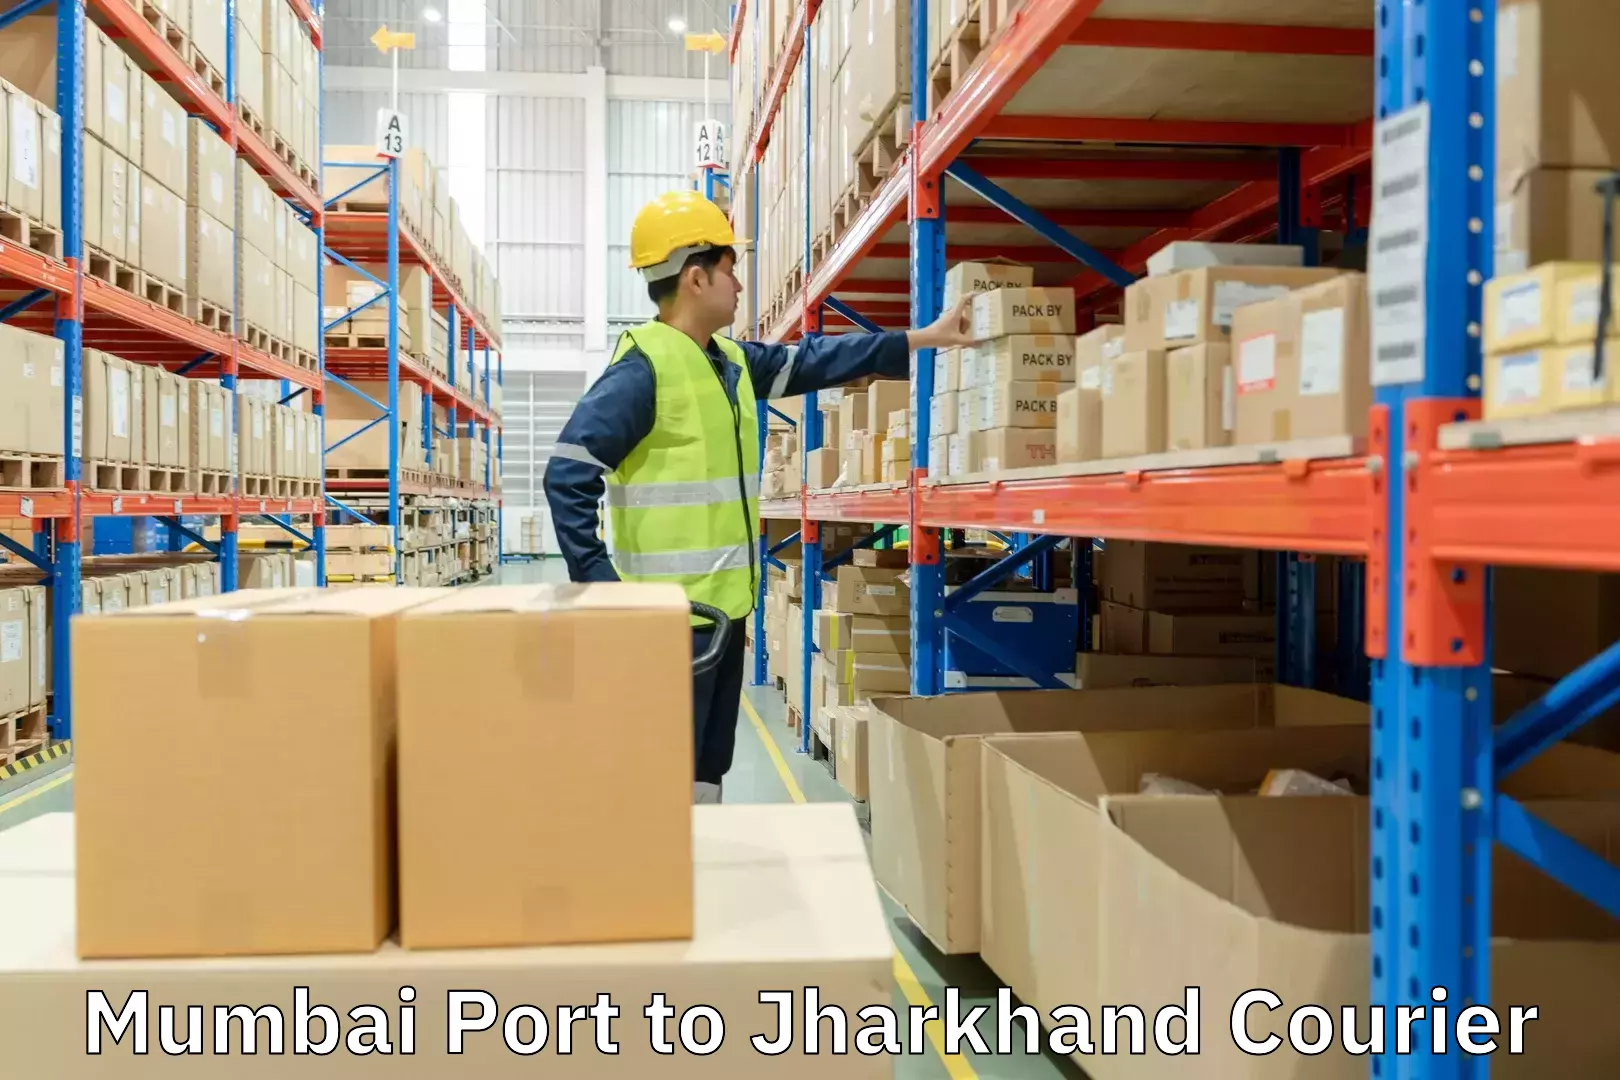 Residential courier service Mumbai Port to Jharkhand